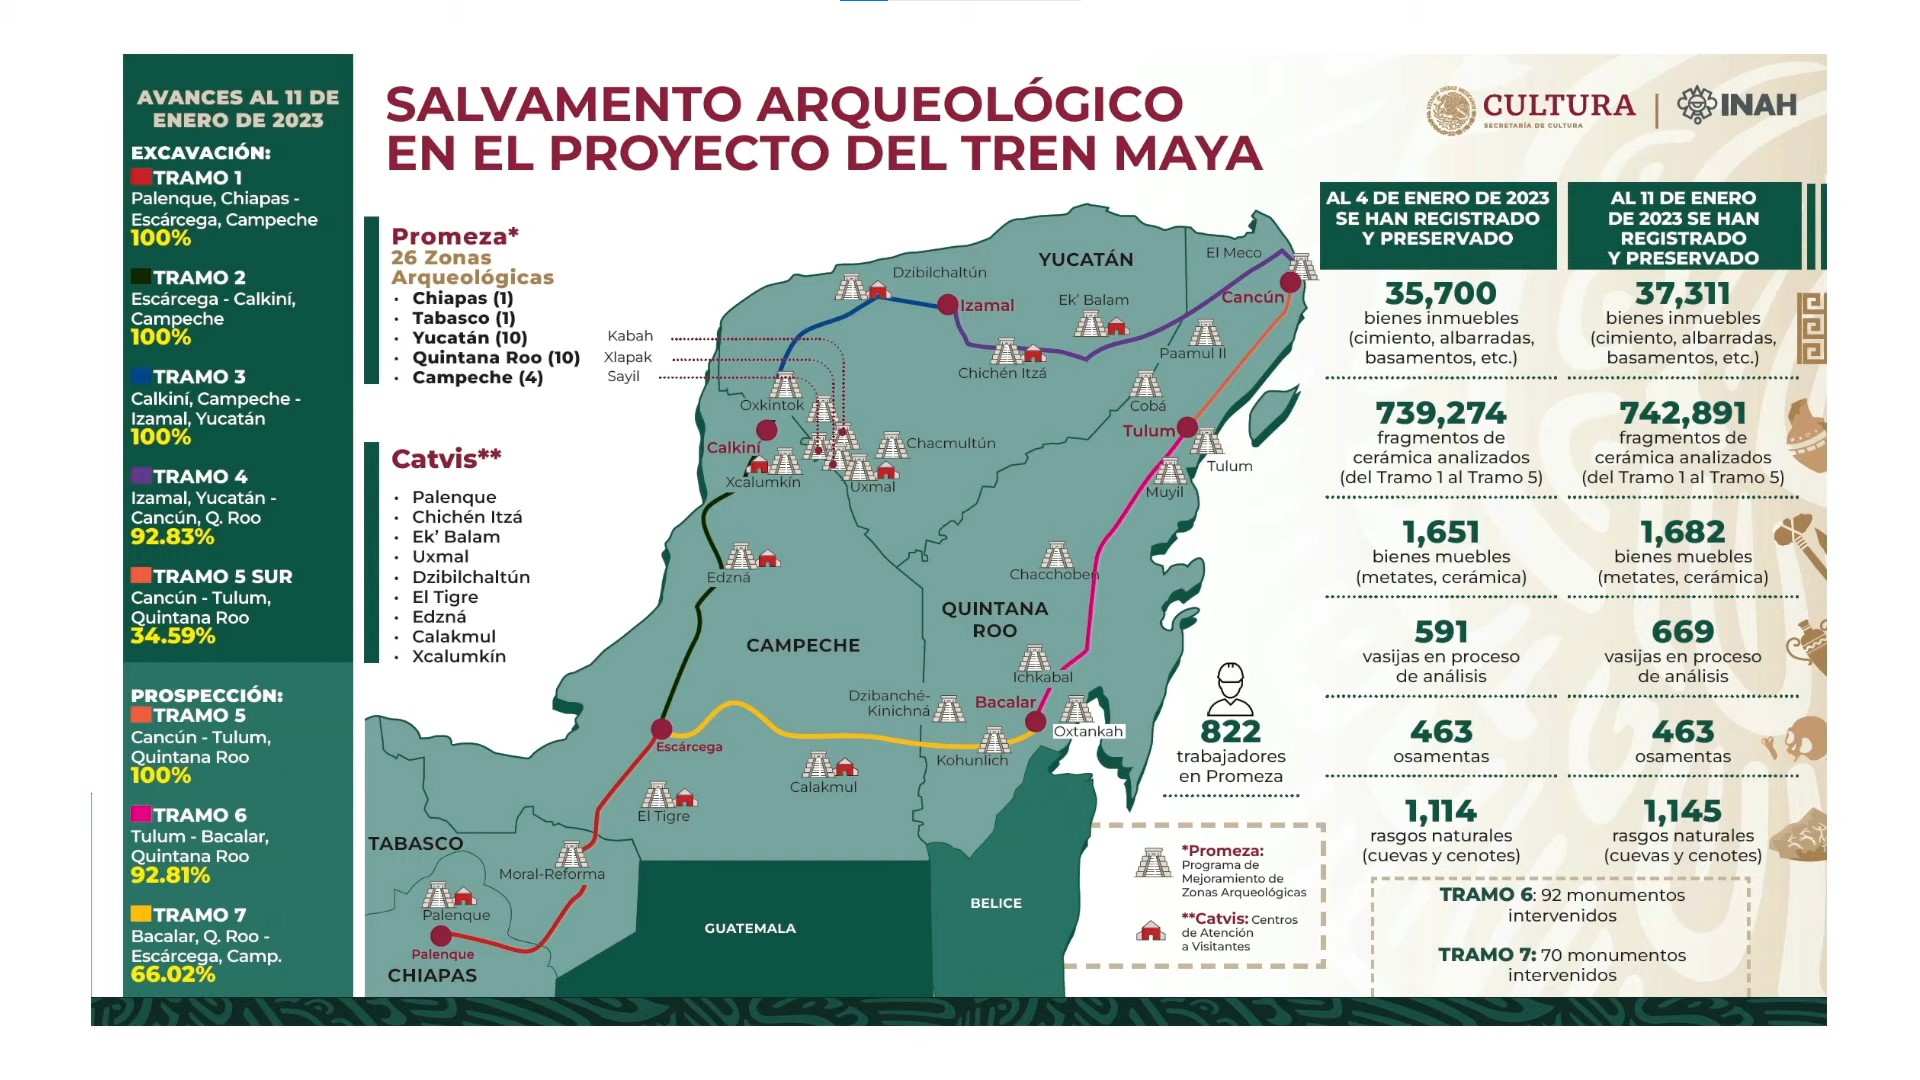 Archaeological salvage work in the Mayan Train project.  Photo: Government of Mexico